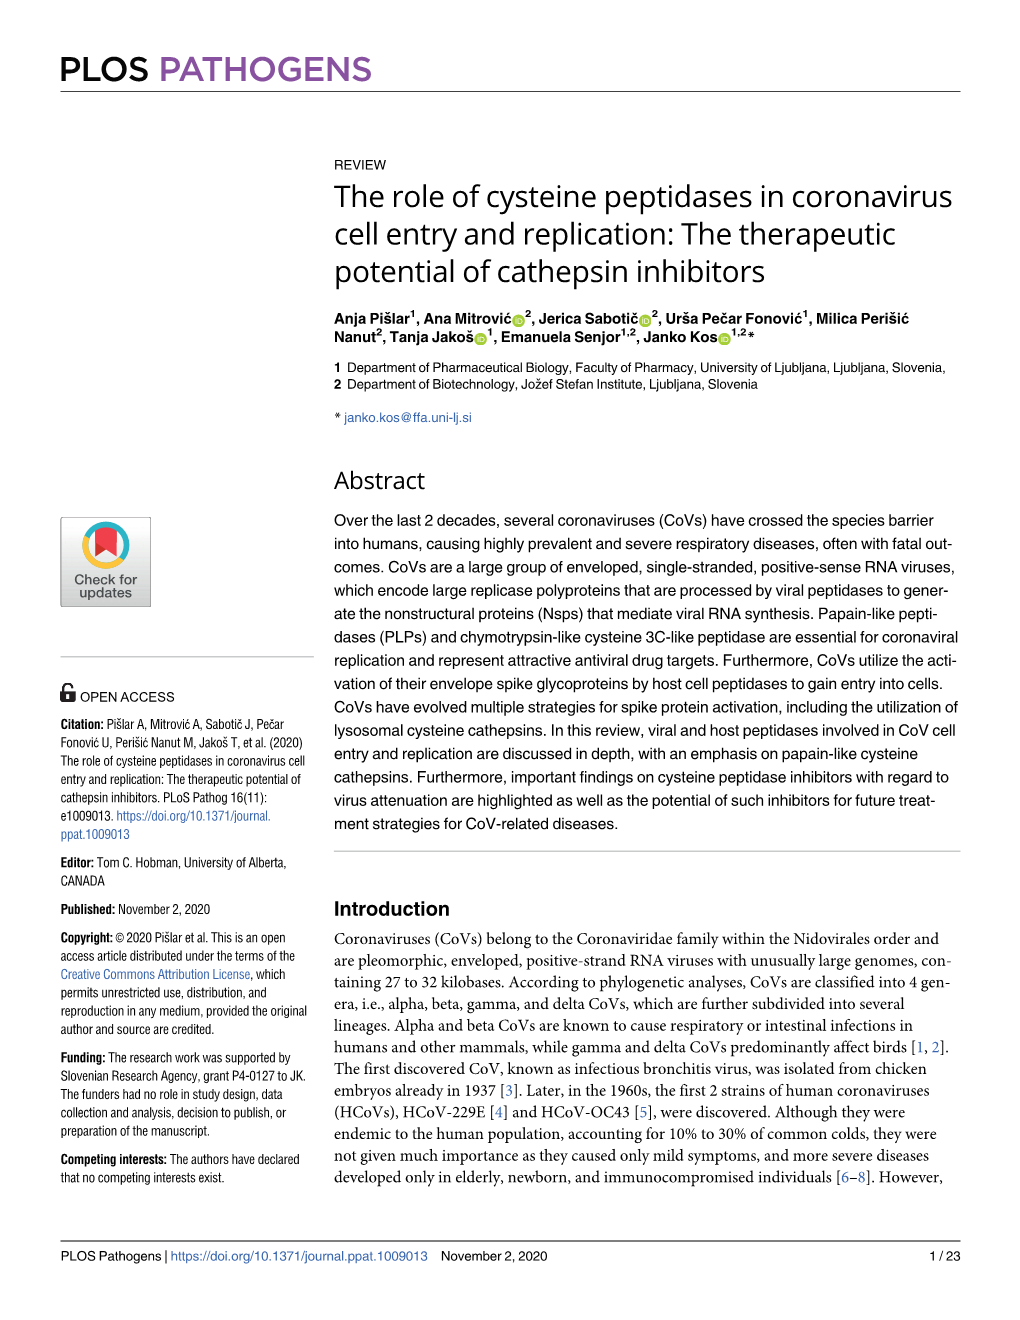 The Role of Cysteine Peptidases in Coronavirus Cell Entry and Replication: the Therapeutic Potential of Cathepsin Inhibitors